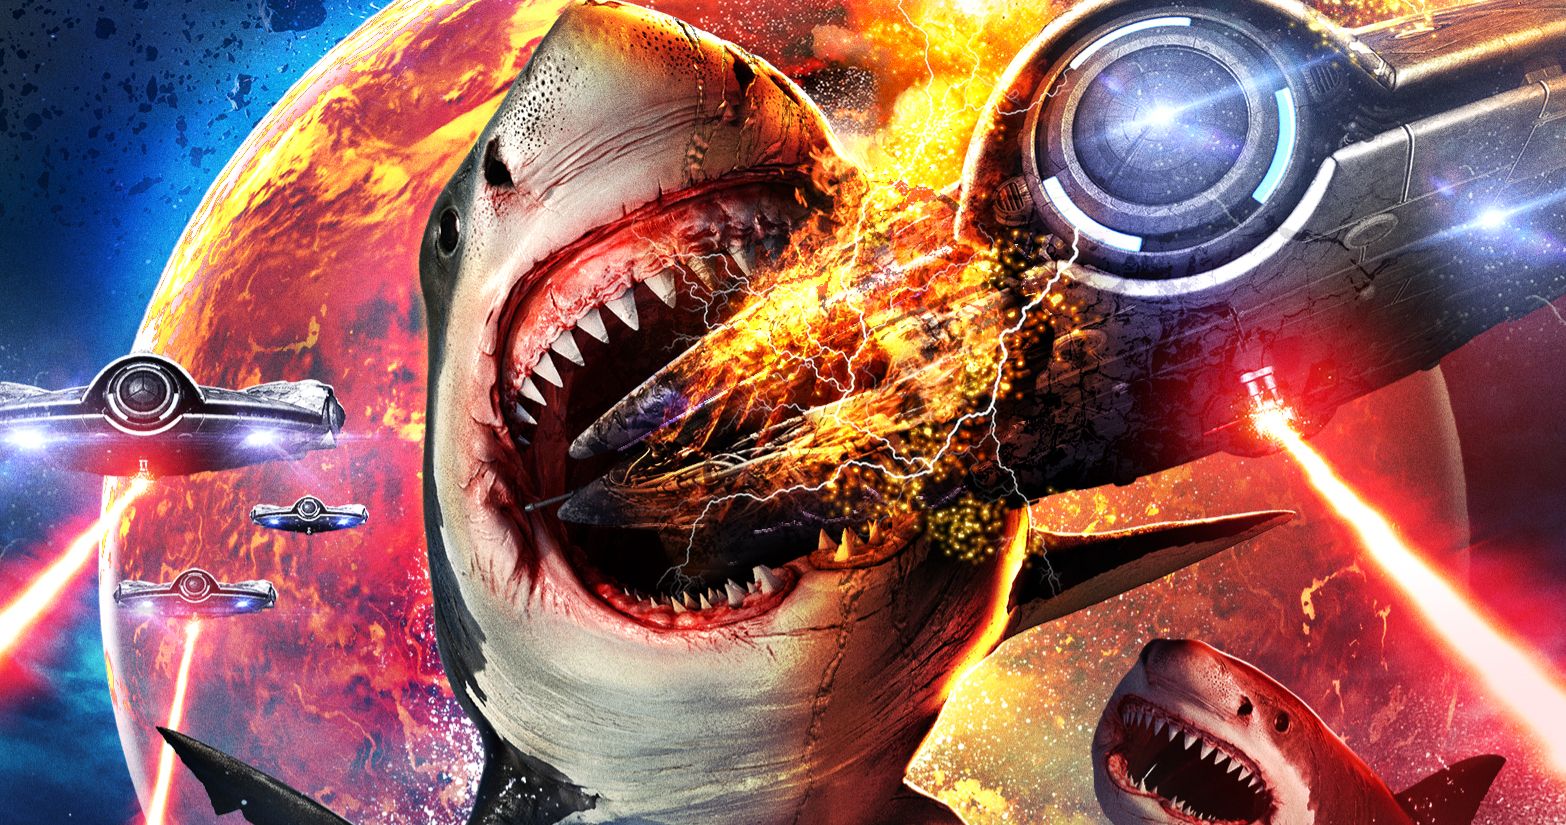 Shark Encounters of the Third Kind Trailer: Get Ready for Jaws in Space